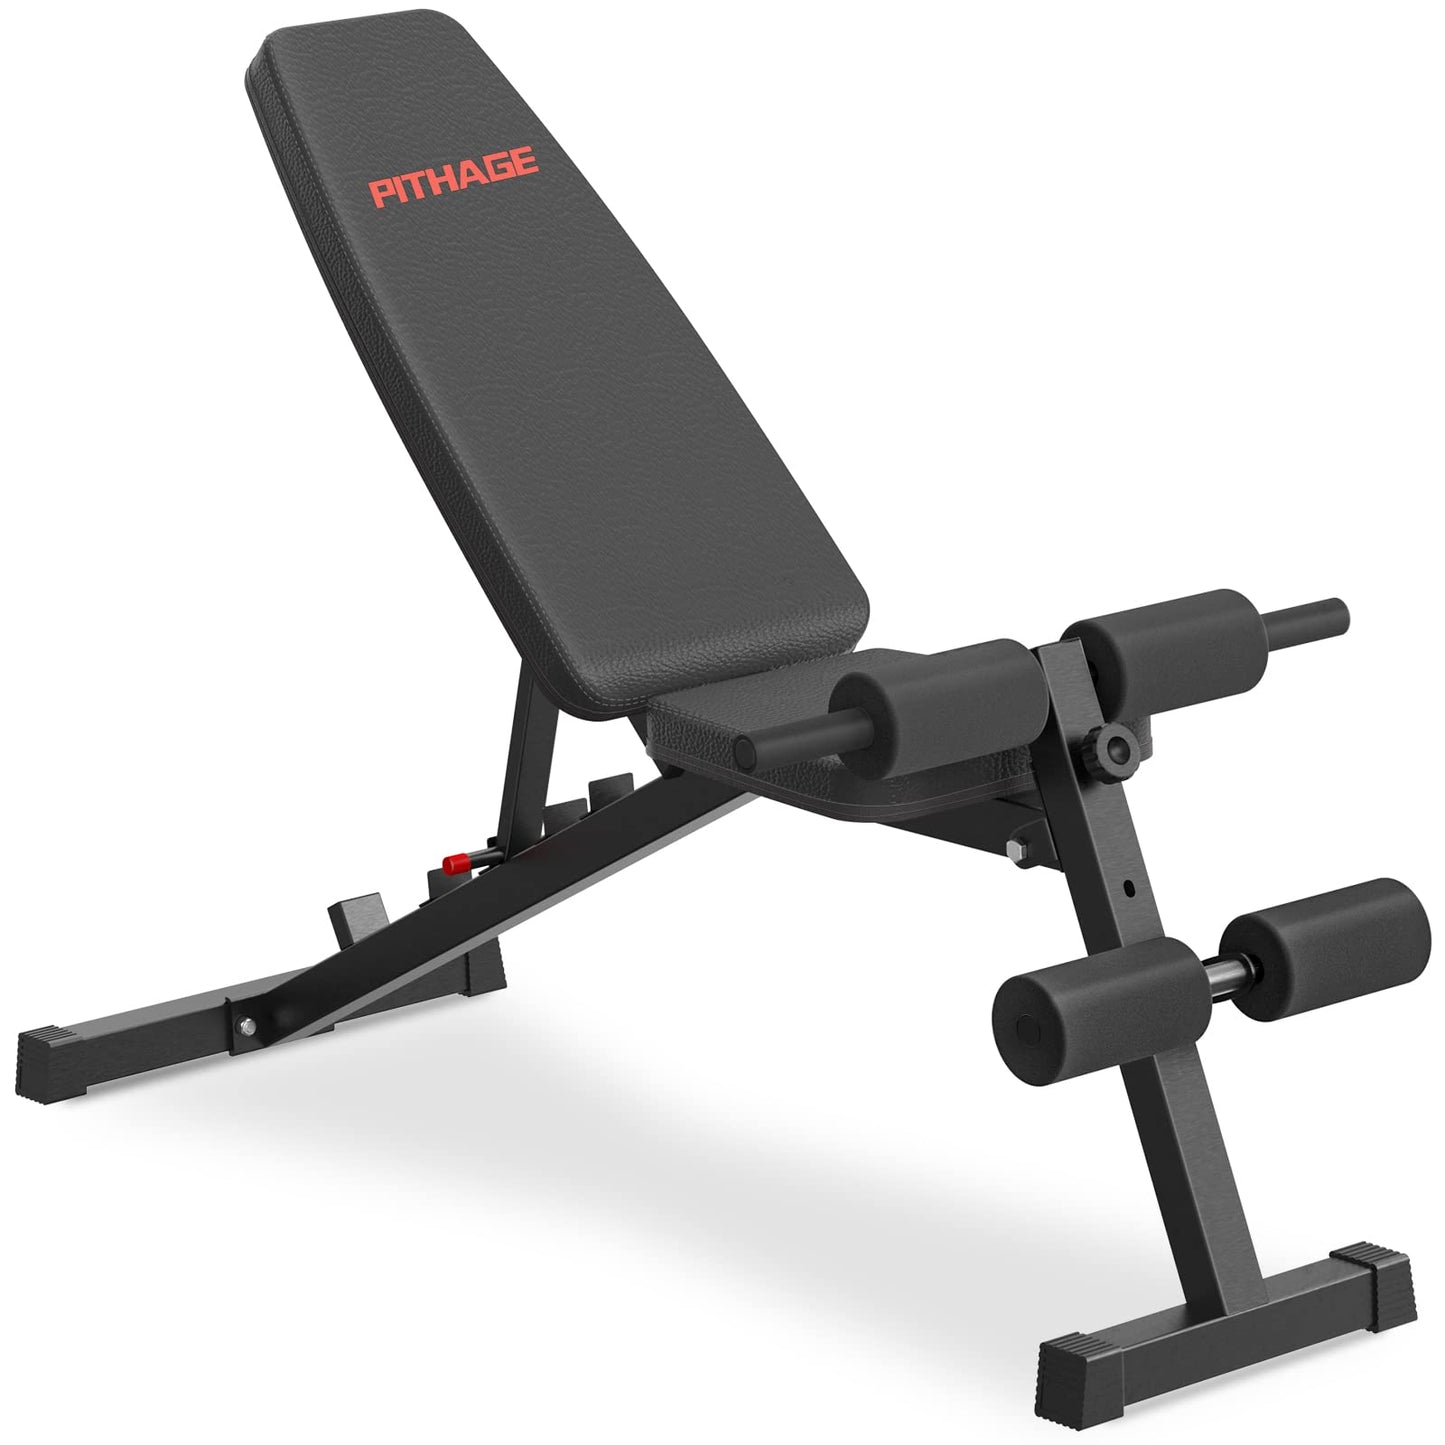 660 LBS PITHAGE Adjustable Weight Bench